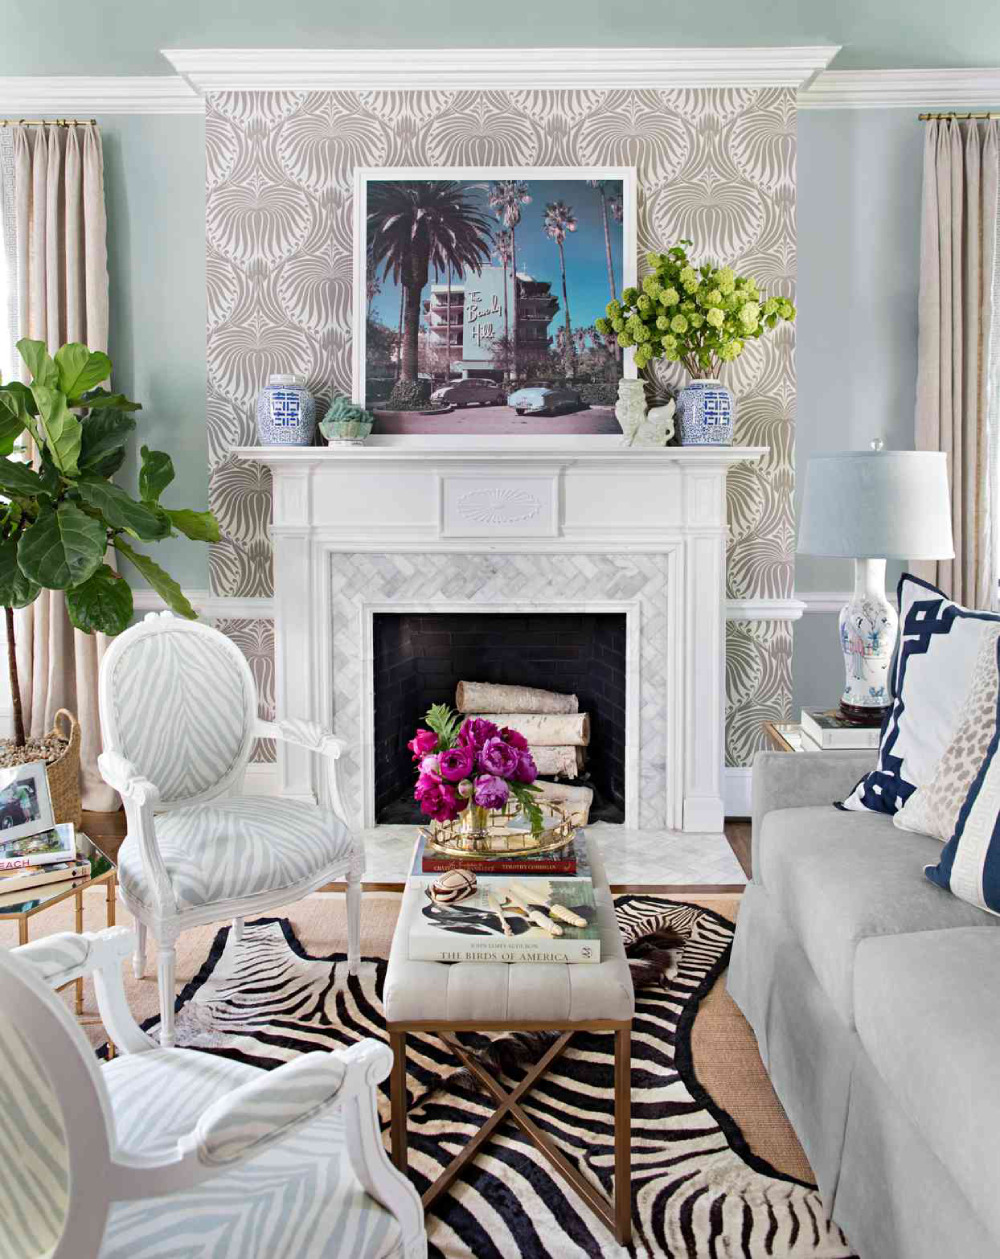 1-57-1 Fireplace mantel ideas to redecorate your room